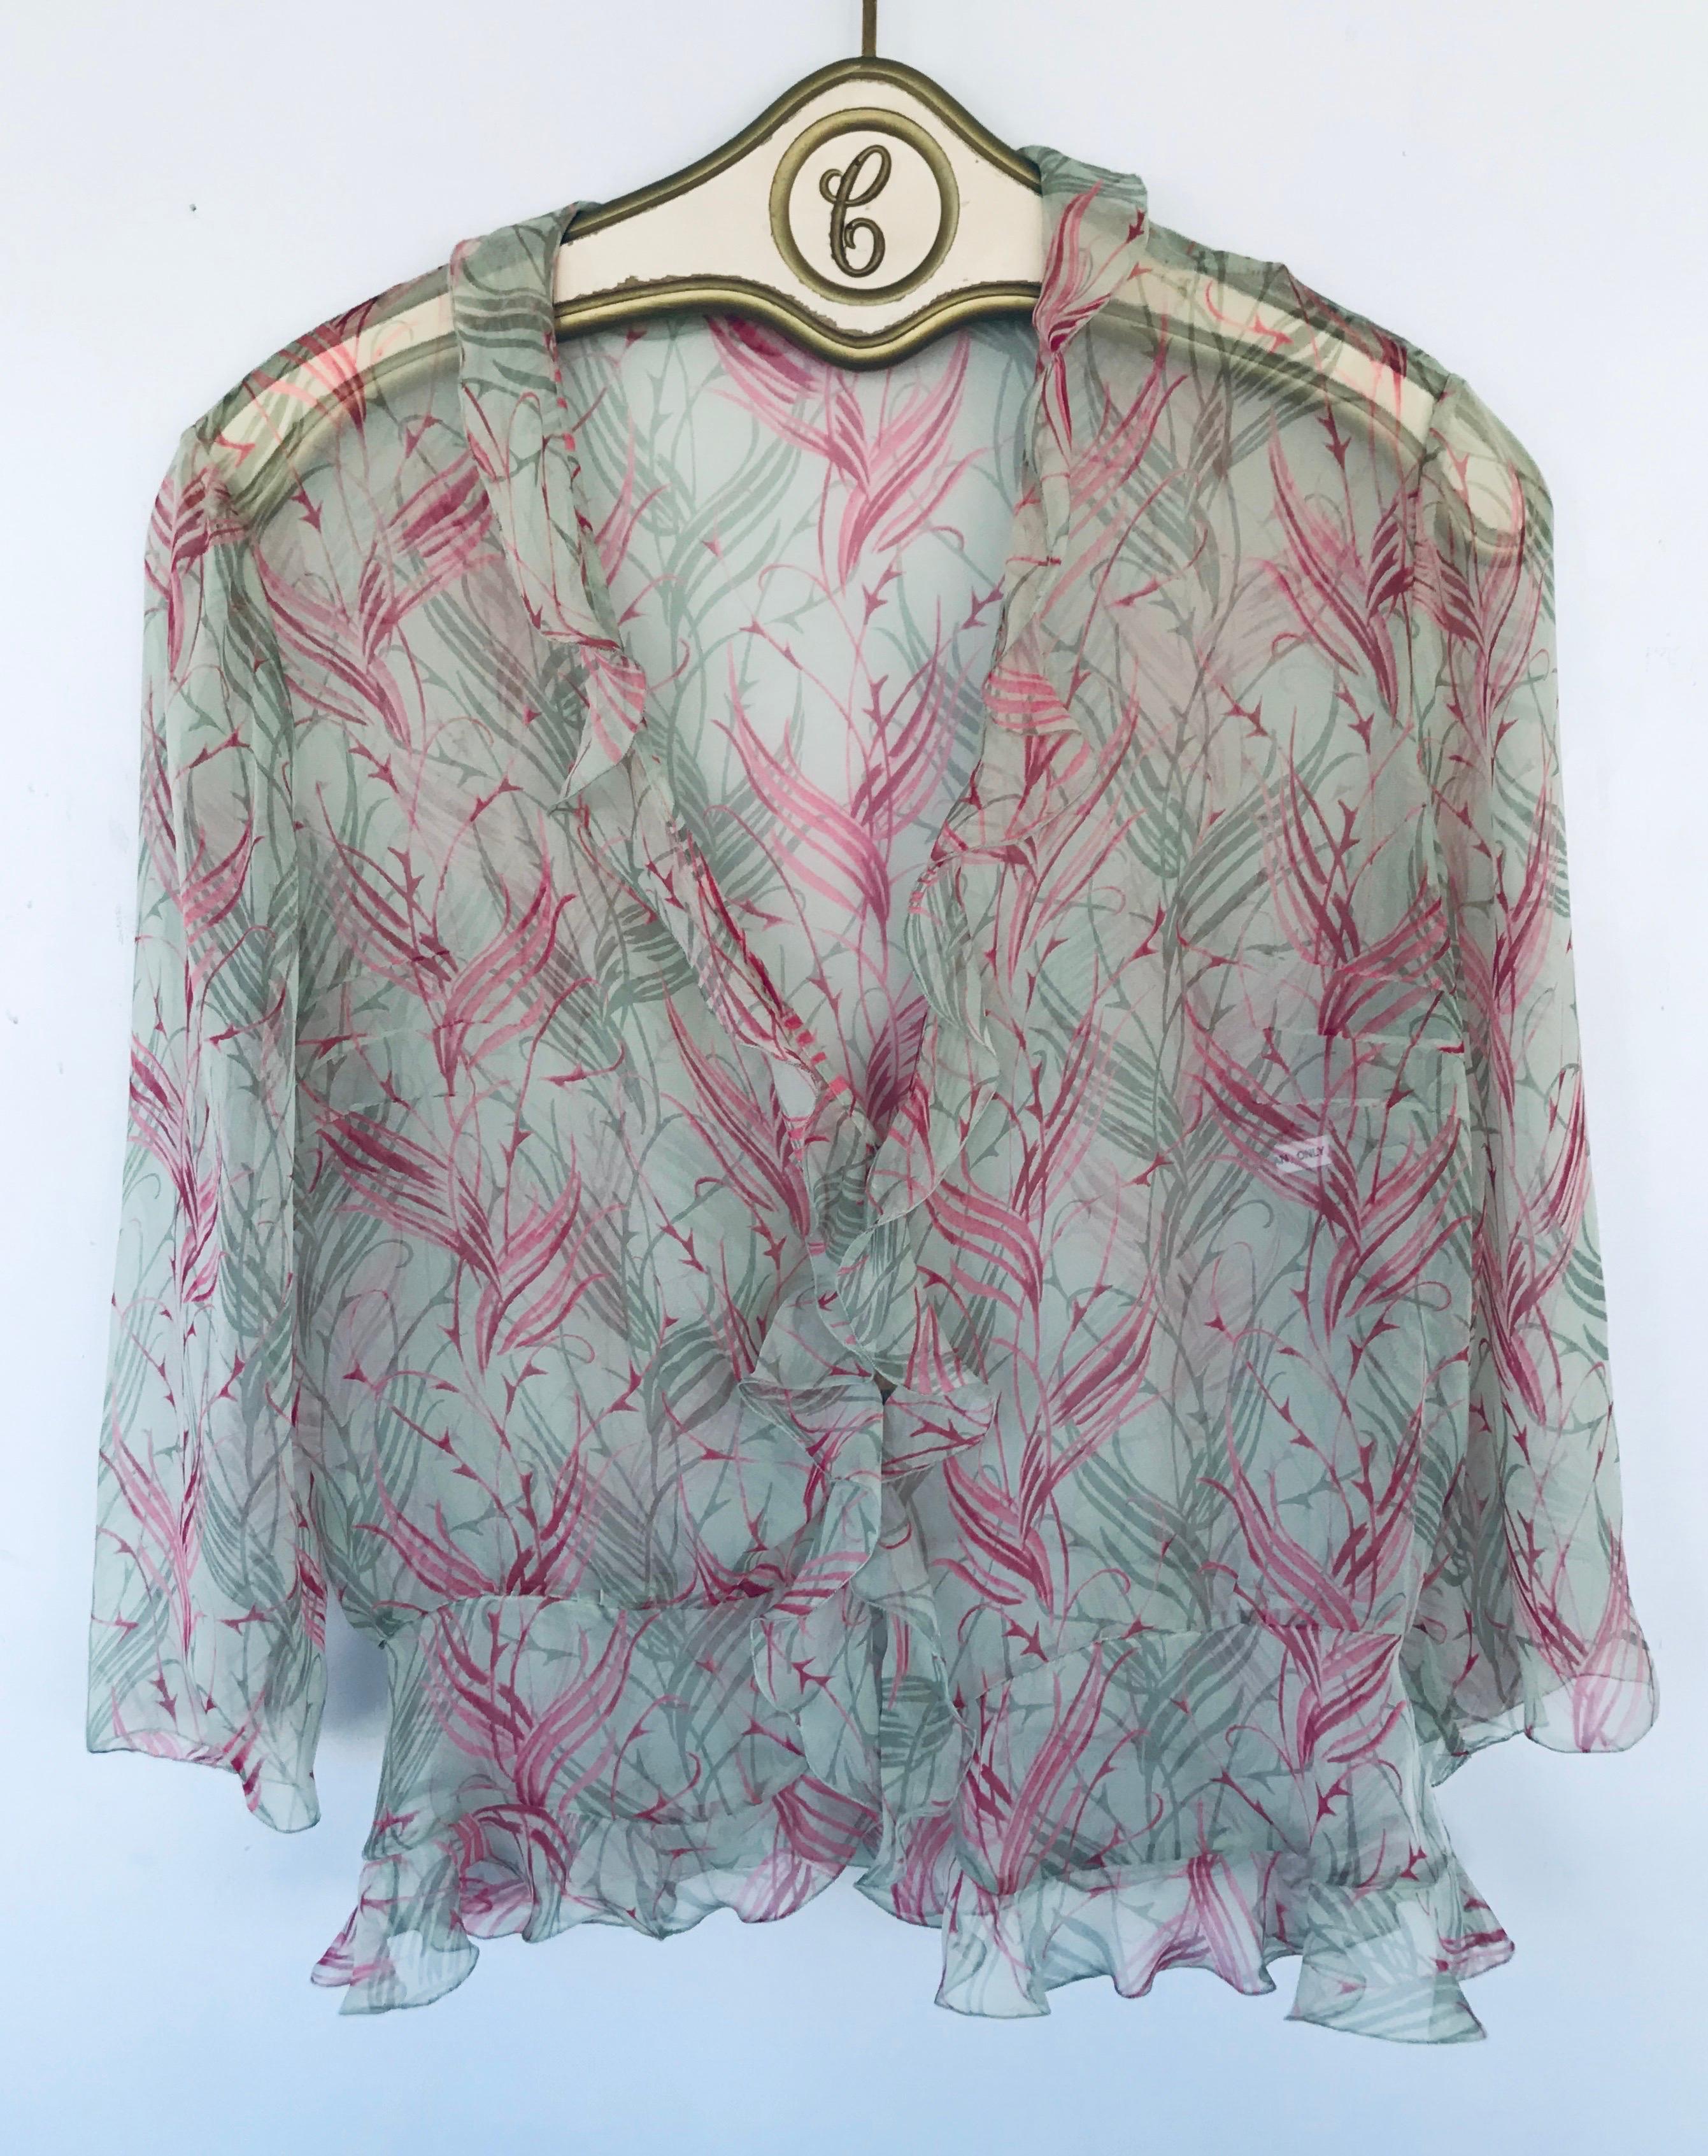 1999 Stella McCartney for Chloe runway top 
100% silk chiffon
Silk covered buttons fasten with silk loops 
Excellent condition 
Size tag is missing this measures up to 42” at the bust up to 34” at the waist 16” at the shoulders and the length is 24”